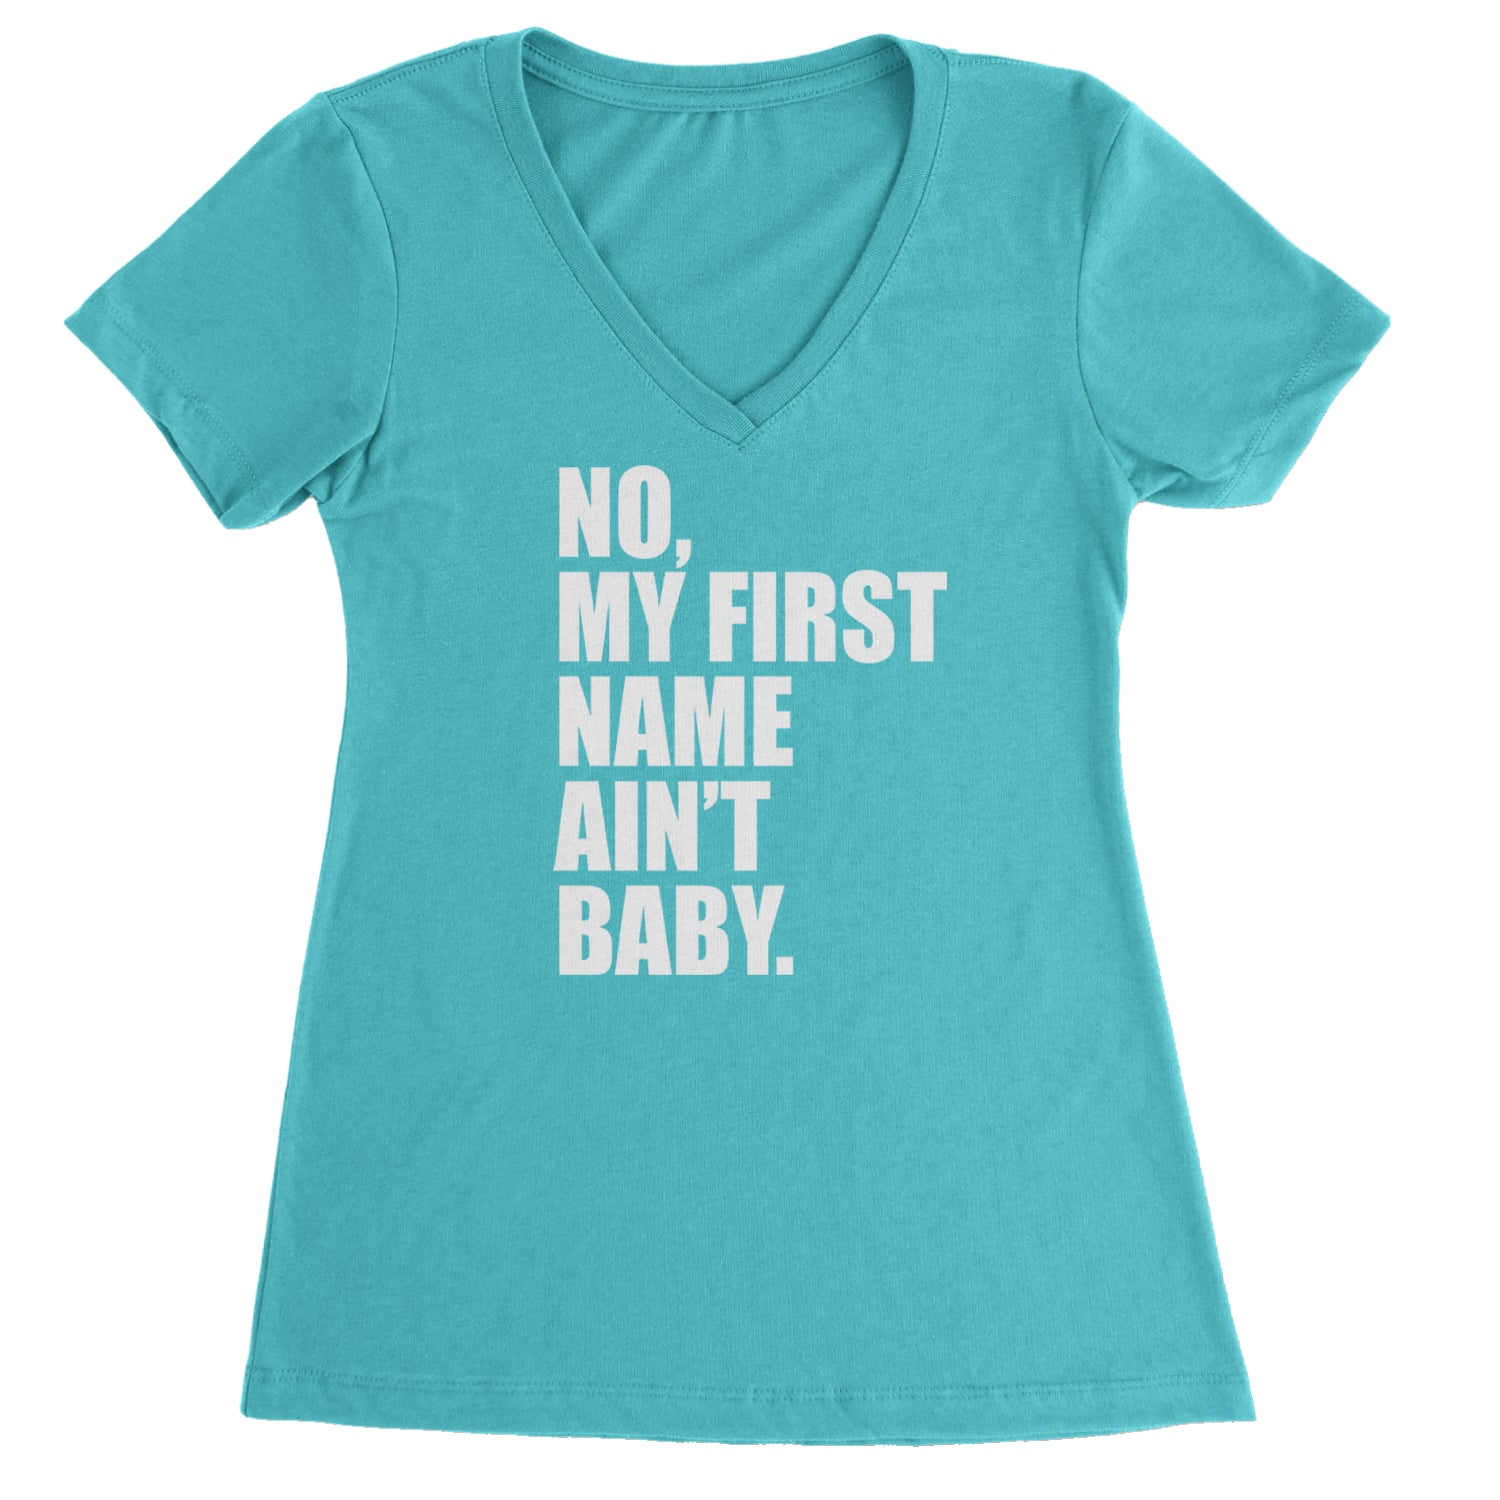 No My First Name Ain't Baby Together Again Ladies V-Neck T-shirt